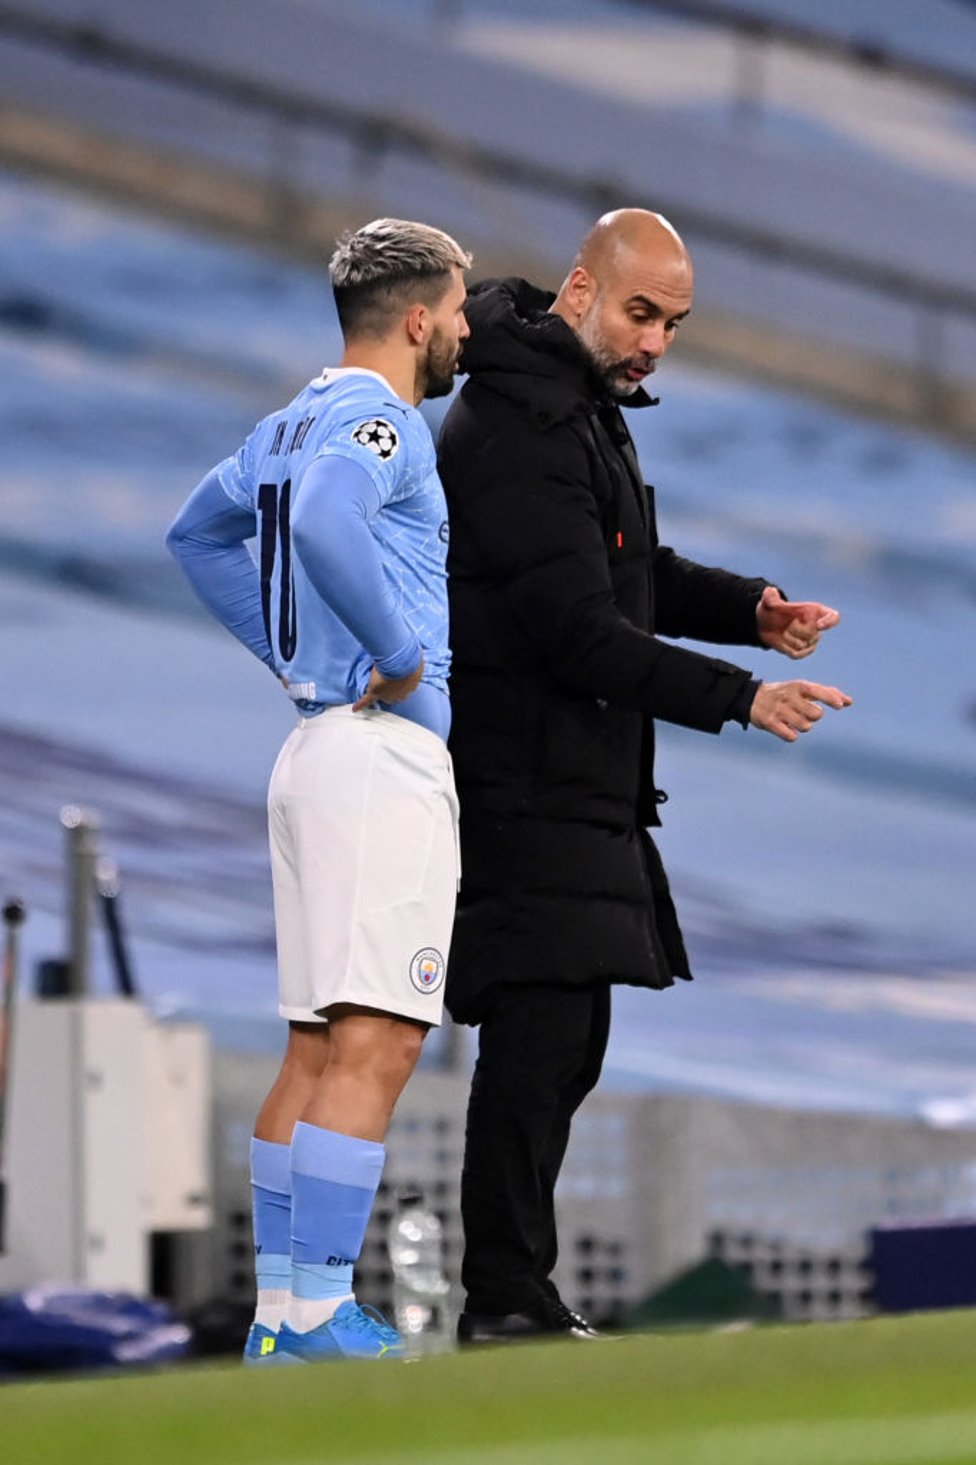 BRIEFING  : Pep gives Sergio his final instruction ahead of his return